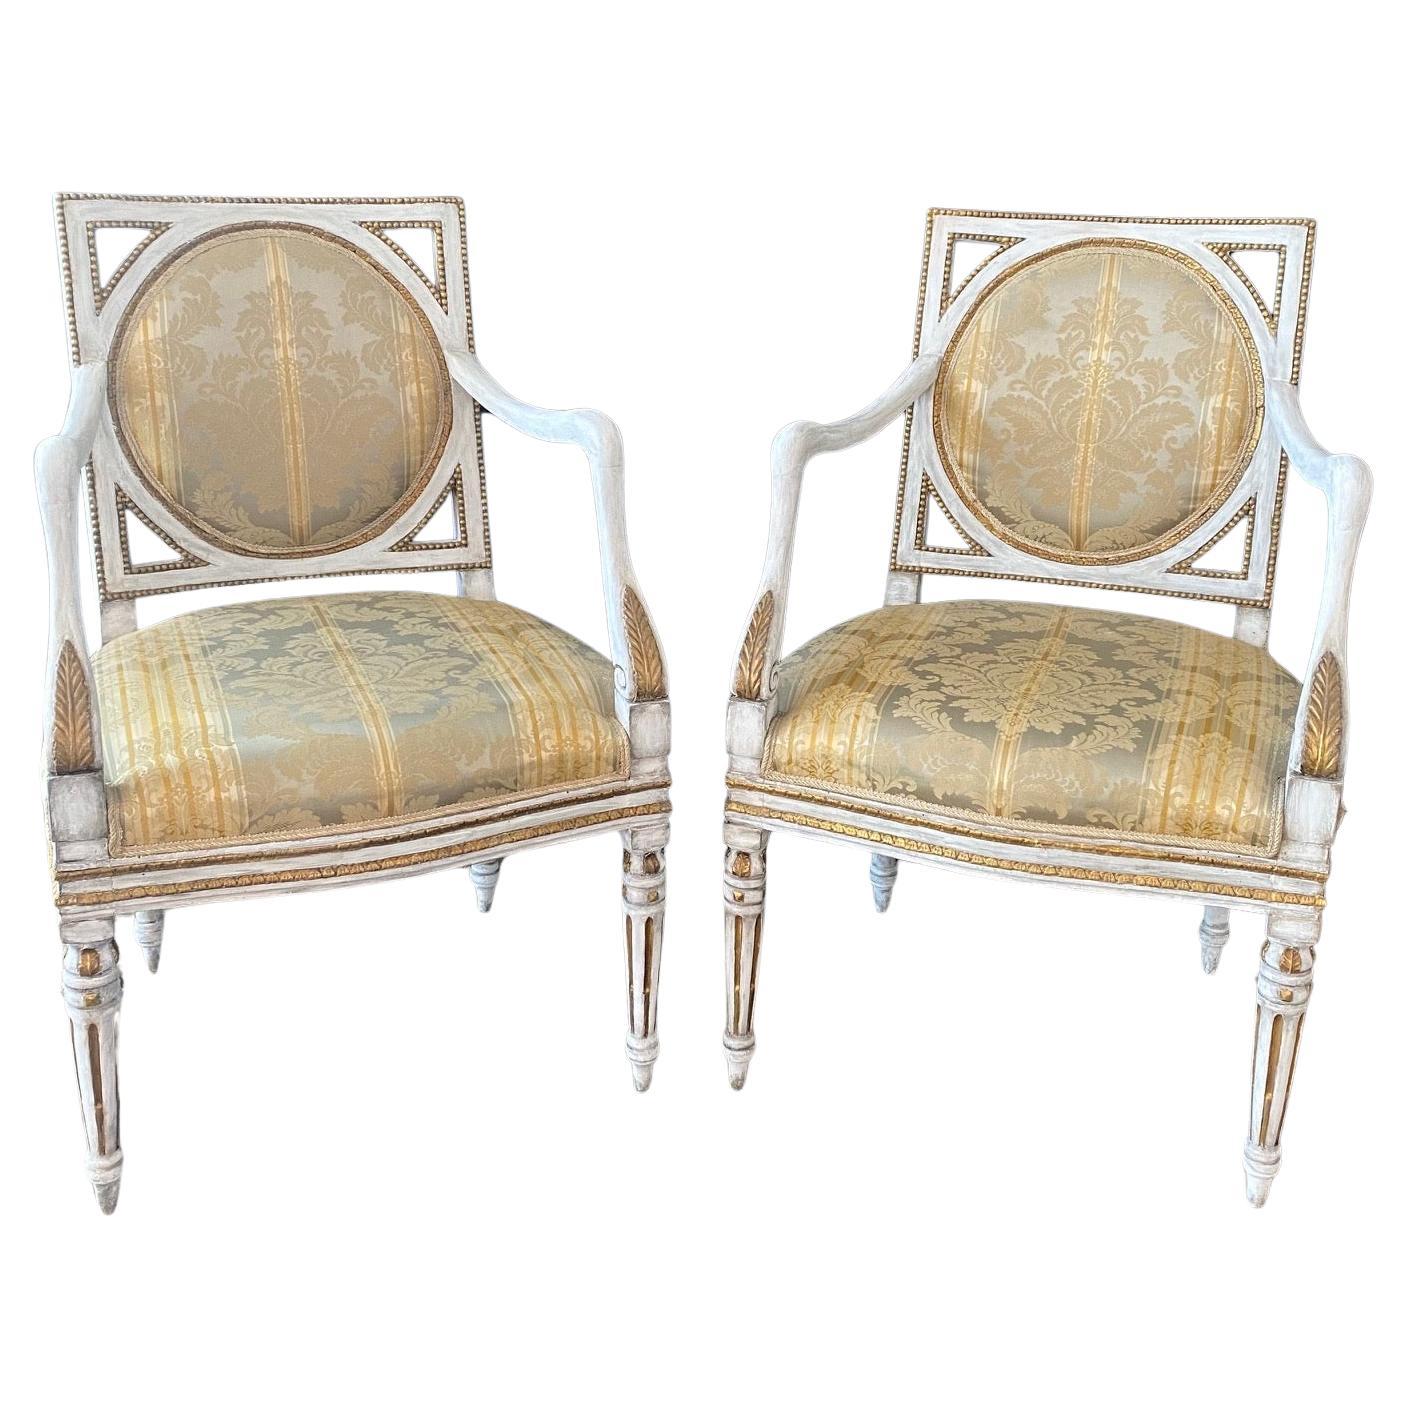 Italian 18th Century Neoclassical Pair of Louis XVI Fauteuils or Armchairs For Sale